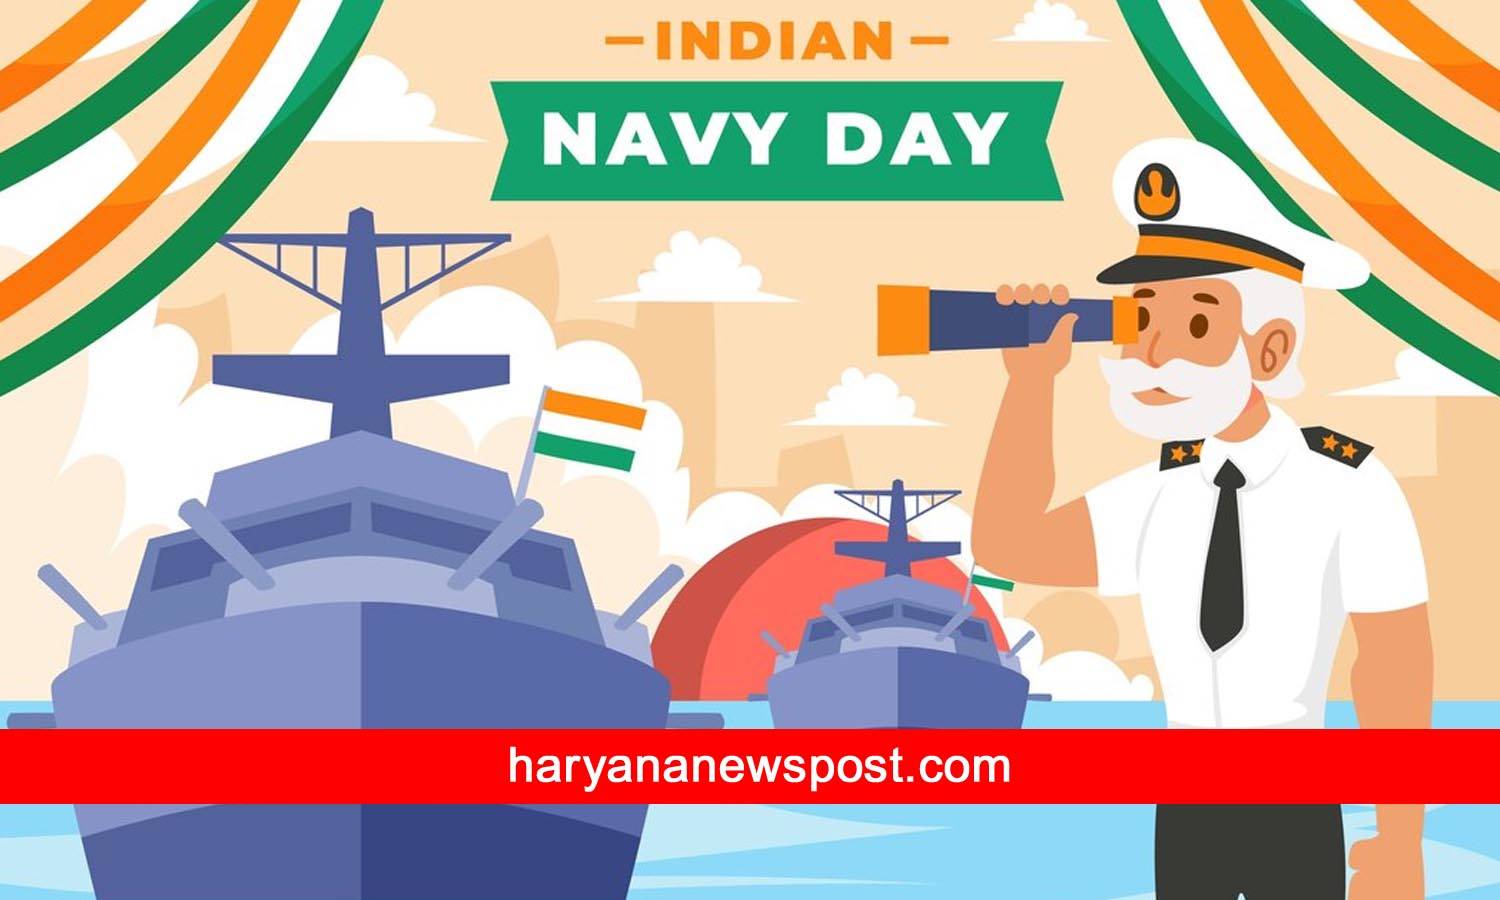 Indian navy day instagram captions in english